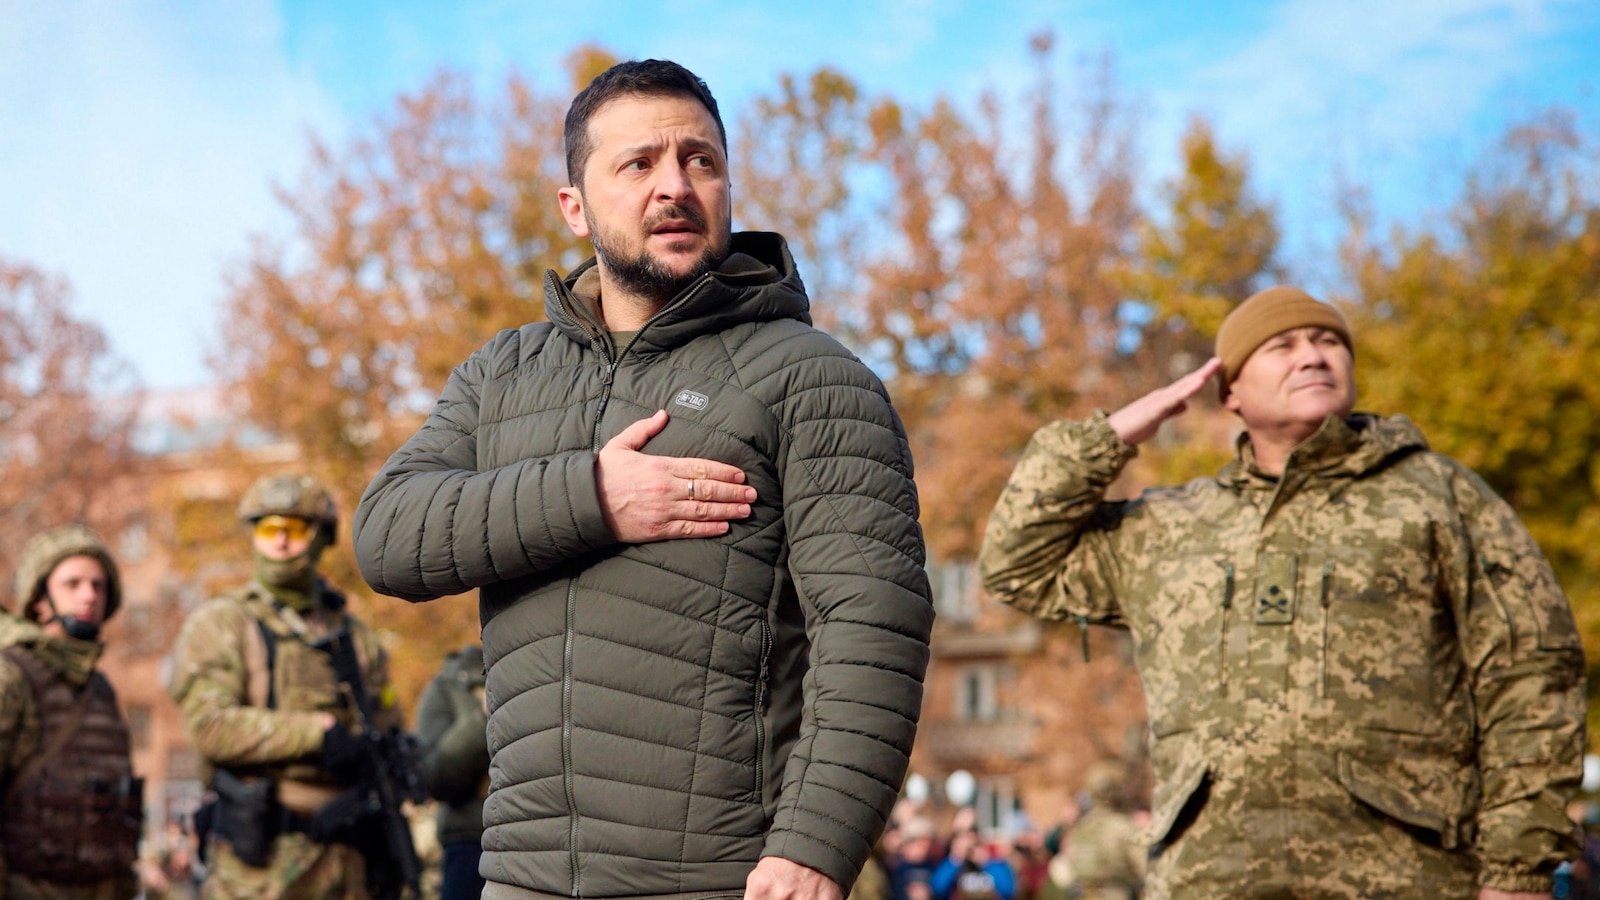 Polish citizen accused of spying for Russia in potential plot to assassinate Ukrainian President Volodymyr Zelenskyy [Video]